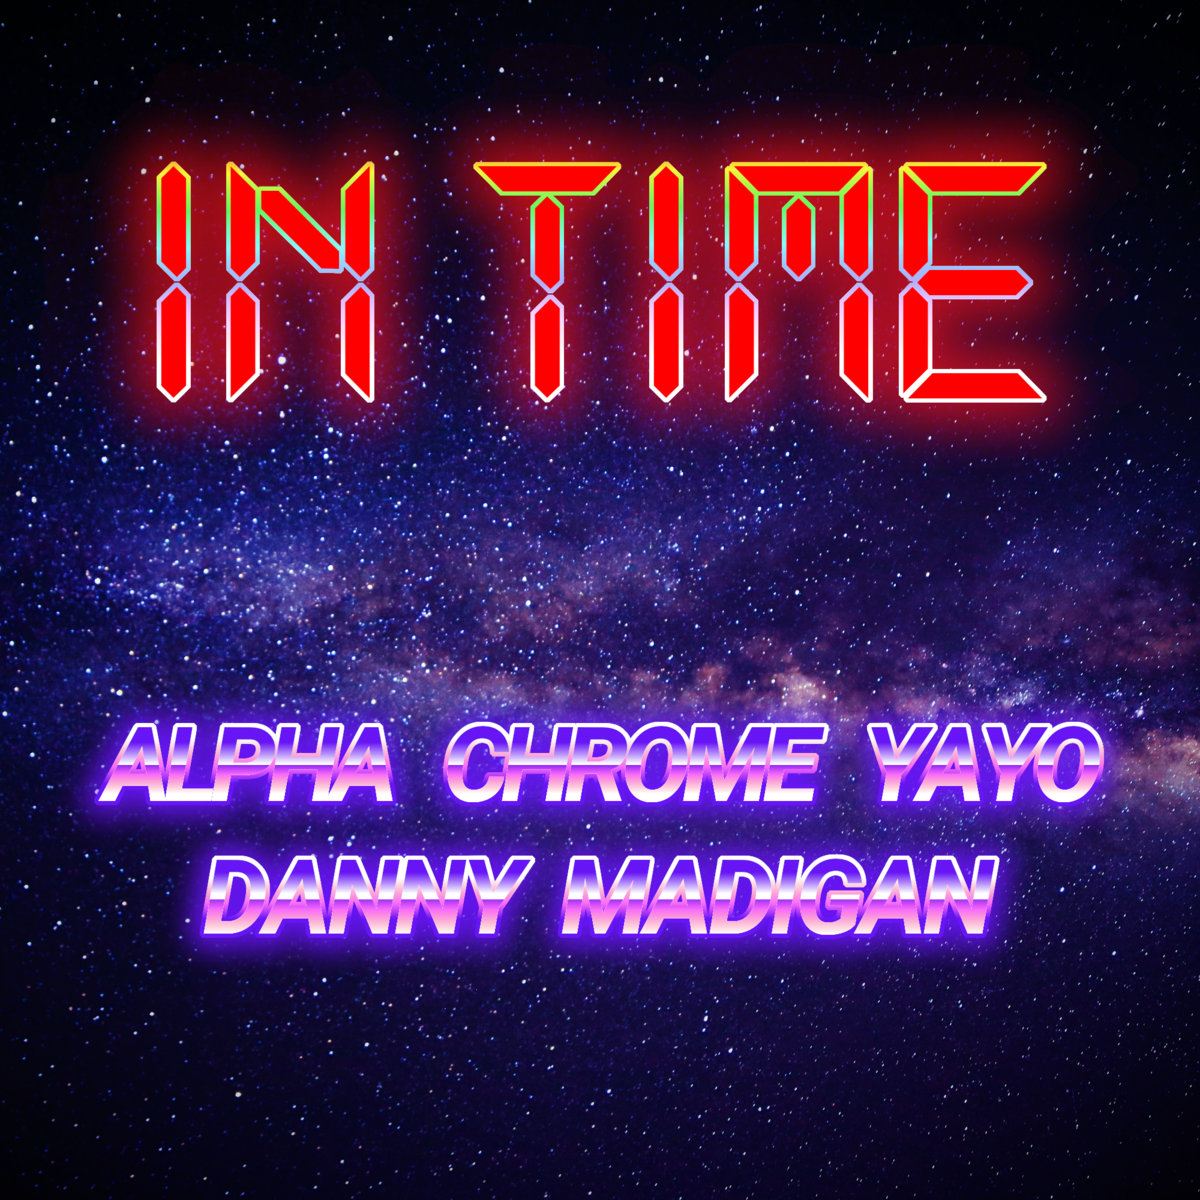 Robbie Robb in time (feat. Stevie salas). Times Alpha. Alpha time